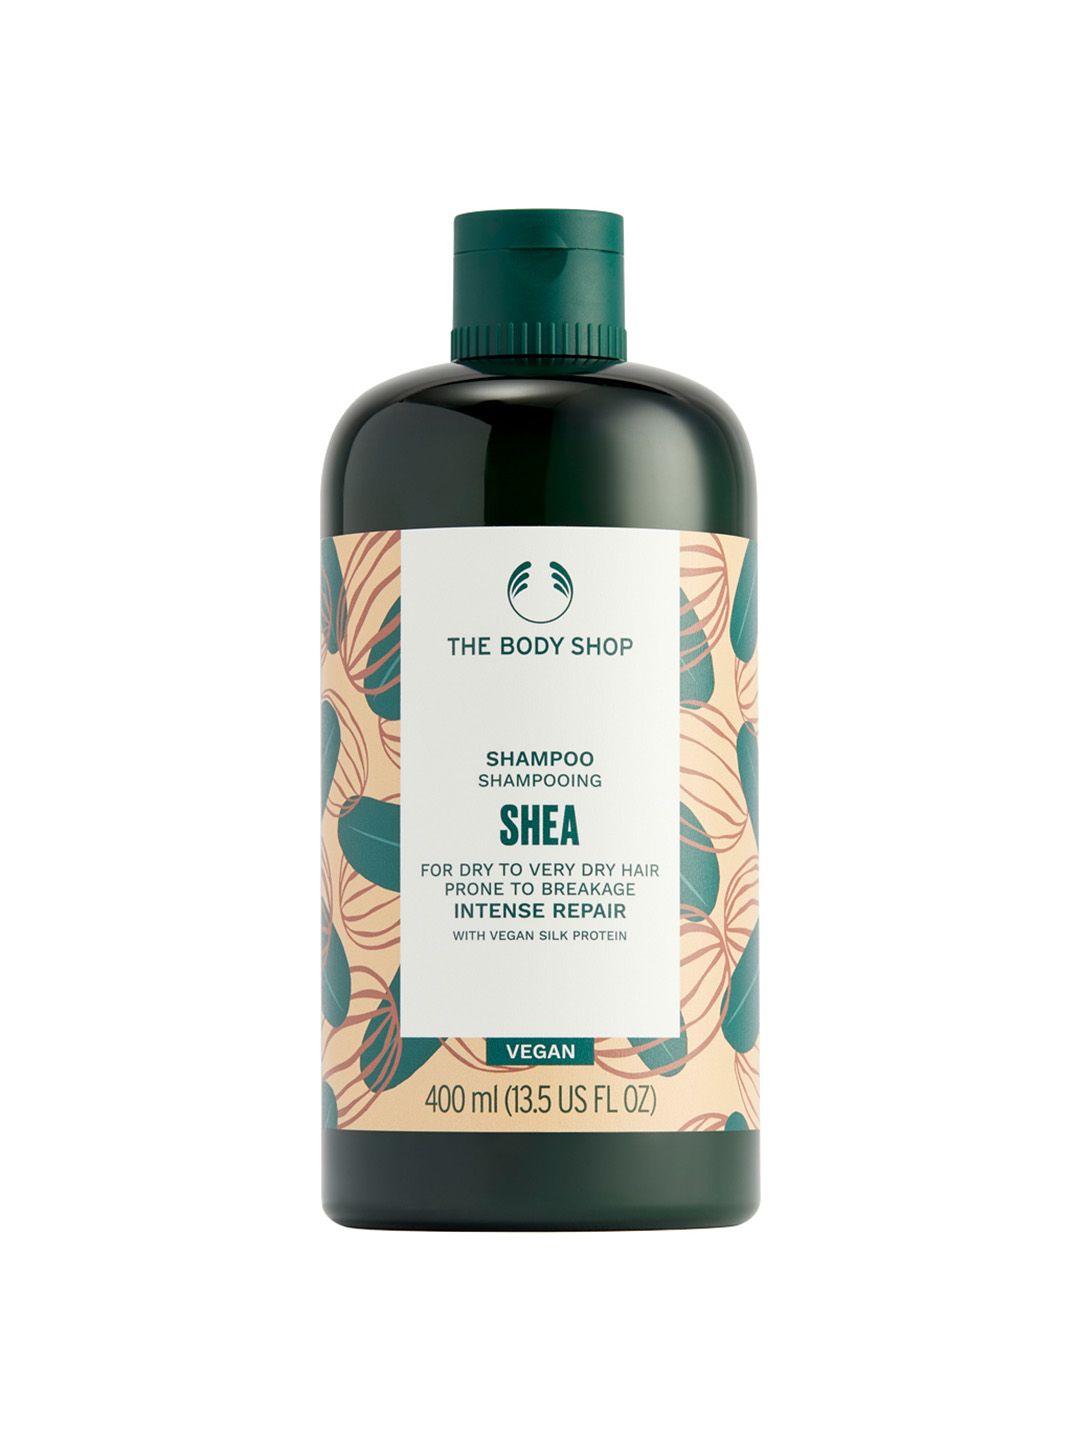 THE BODY SHOP Shea Butter Richly Replenishing Sustainable Shampoo 400ml Price in India